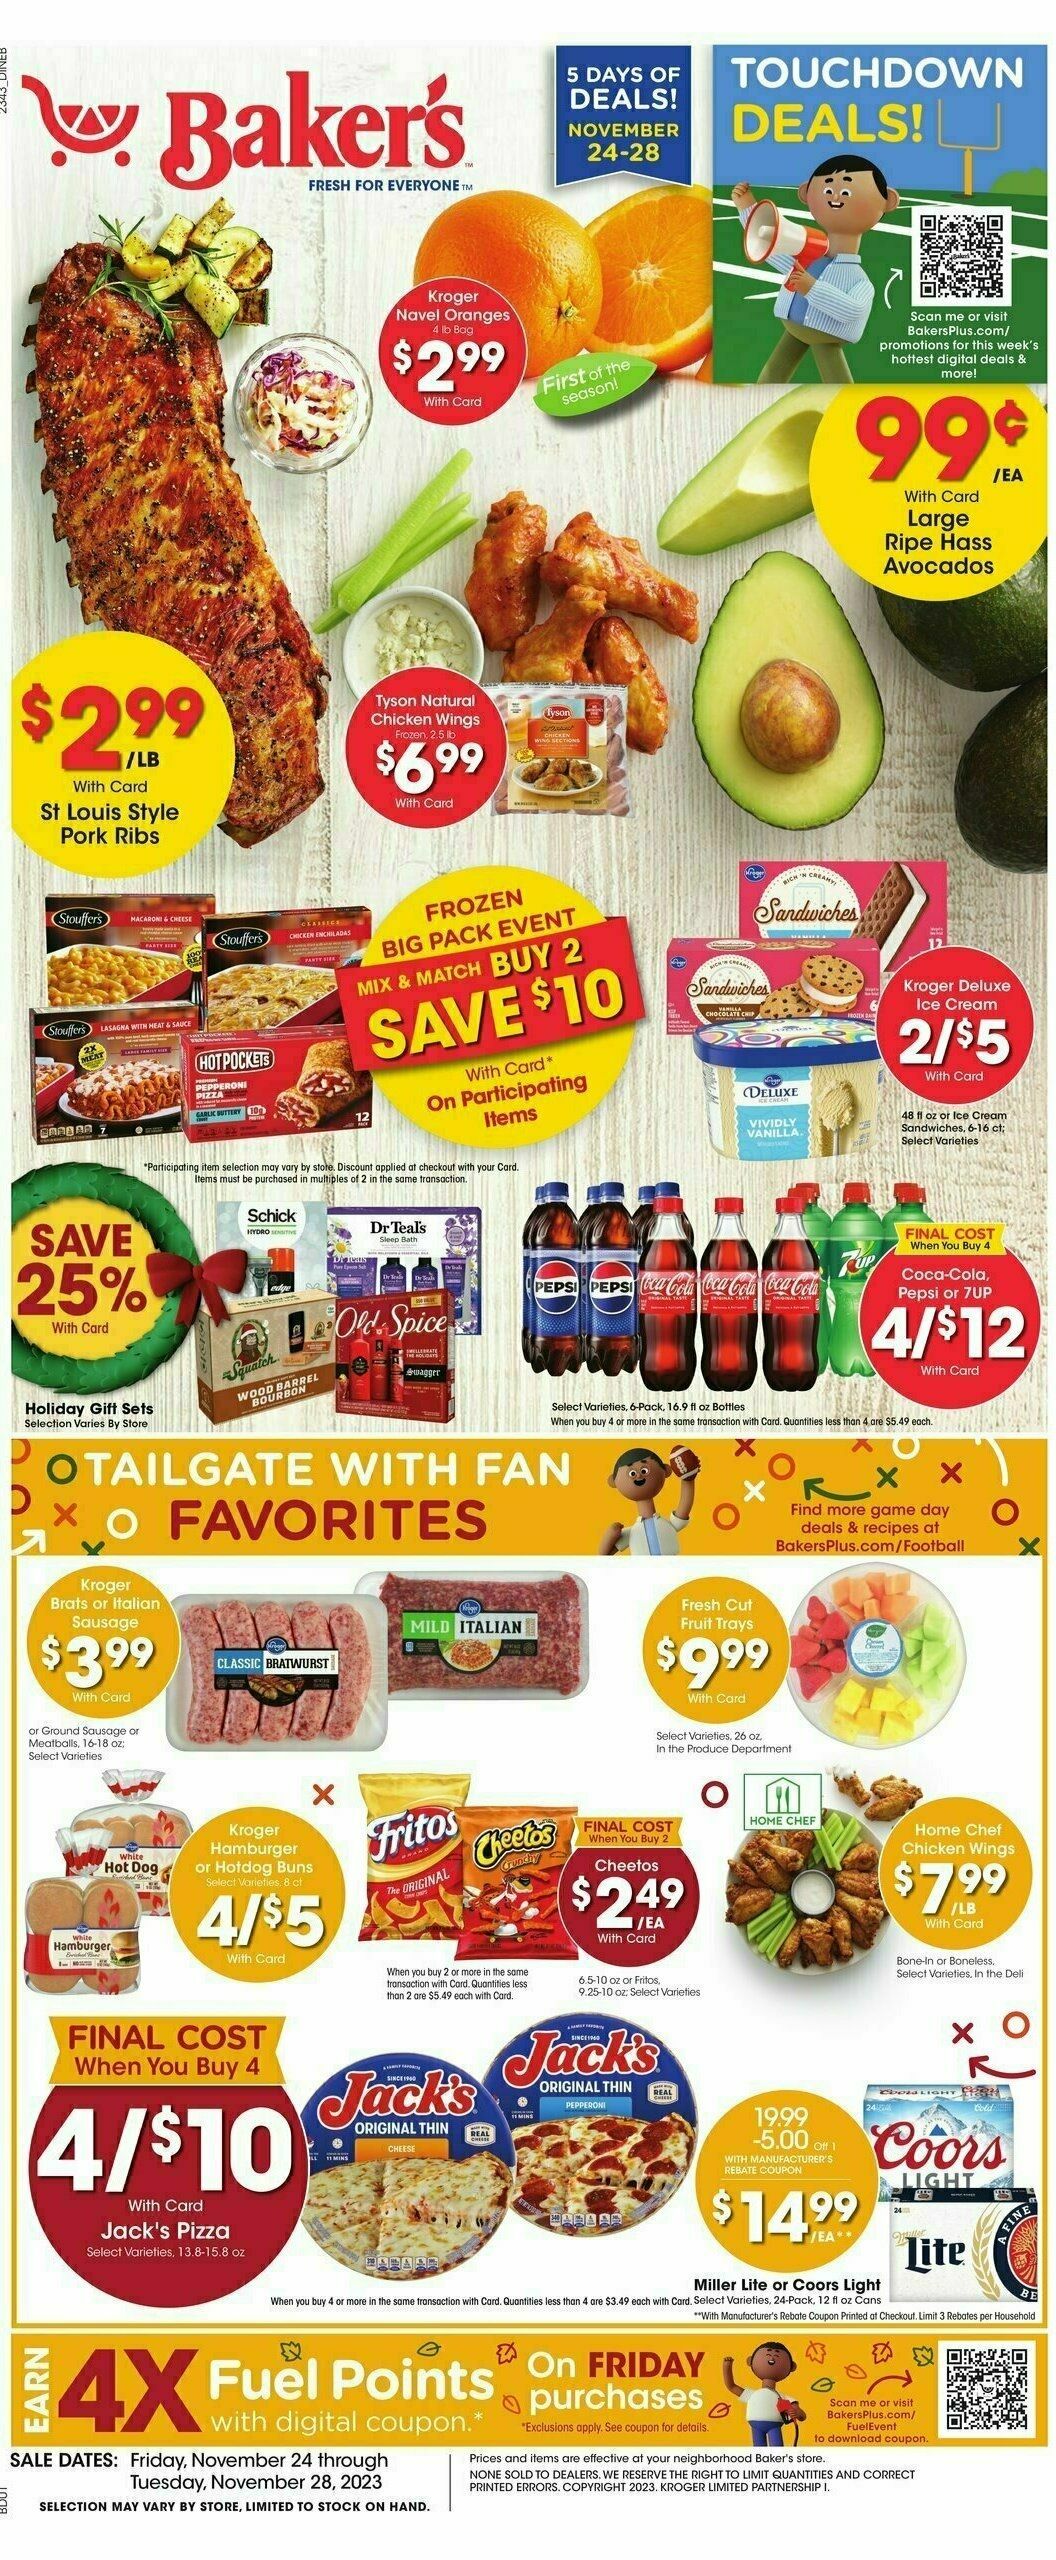 Baker's Weekly Ad from November 24